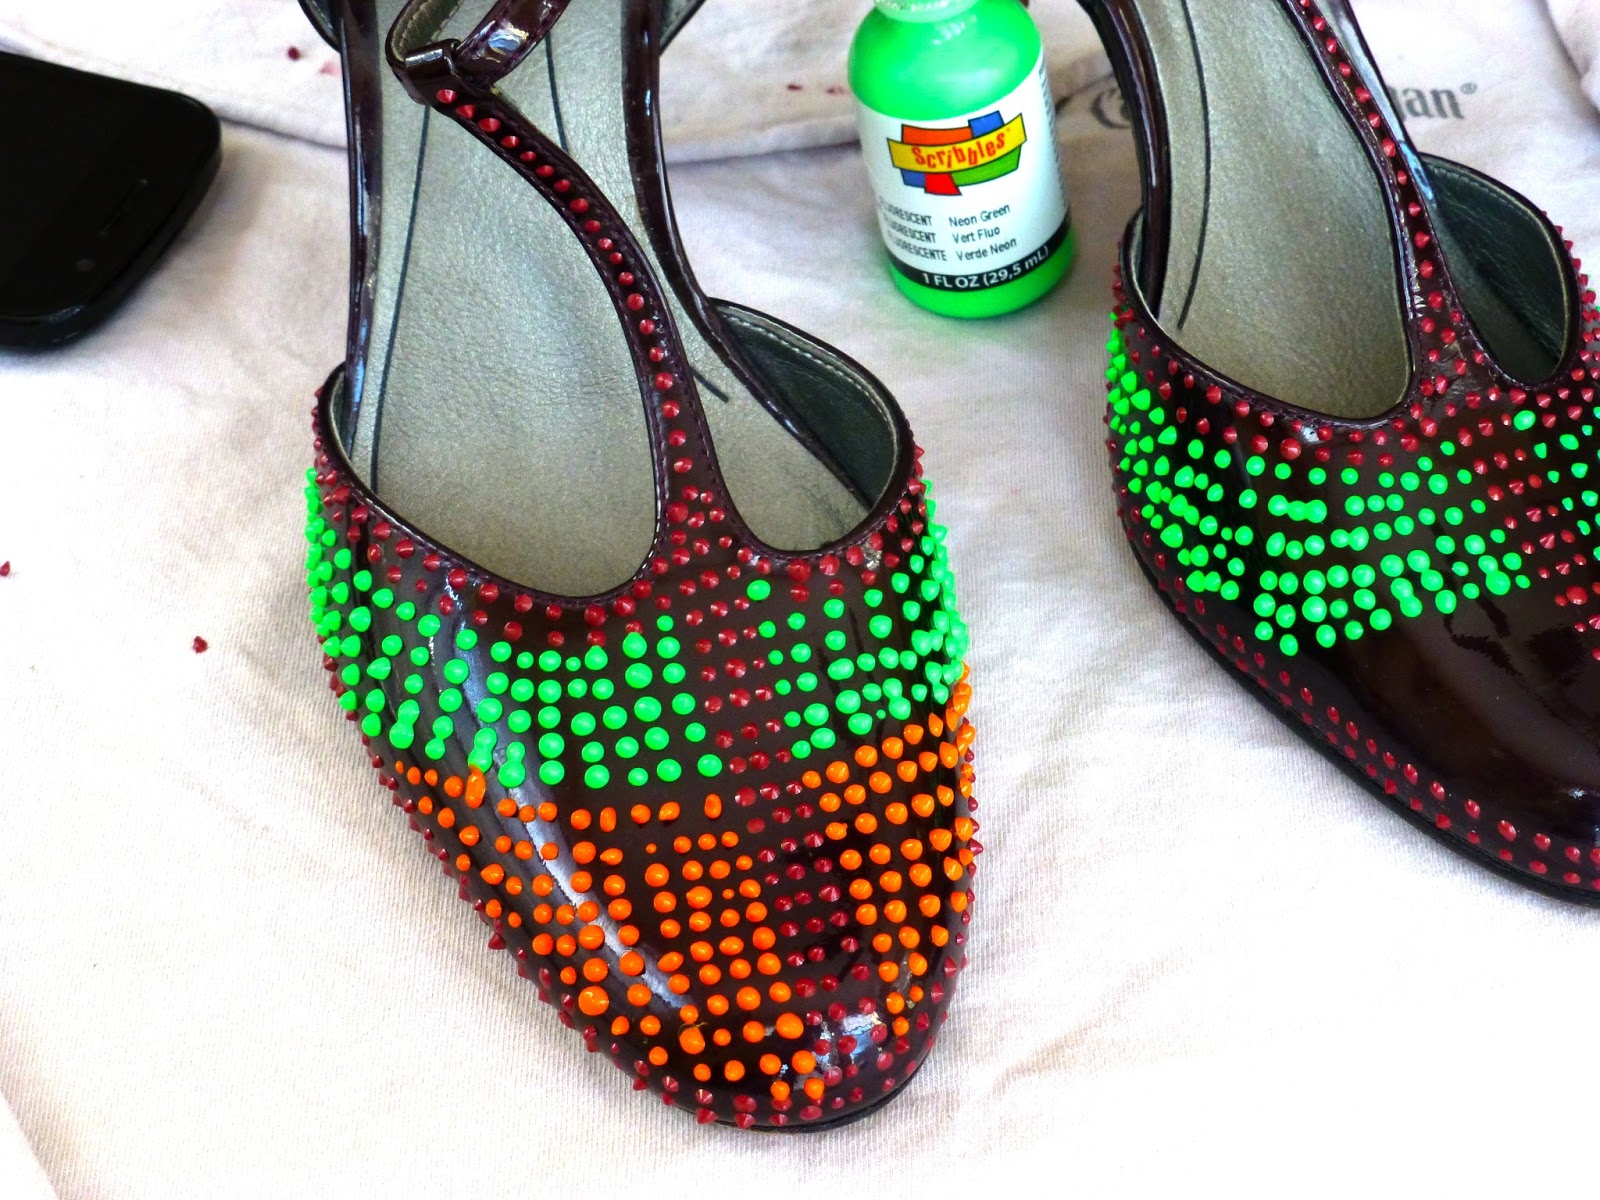  DIY  Spiked or Beaded Shoes  Thriftanista in the City